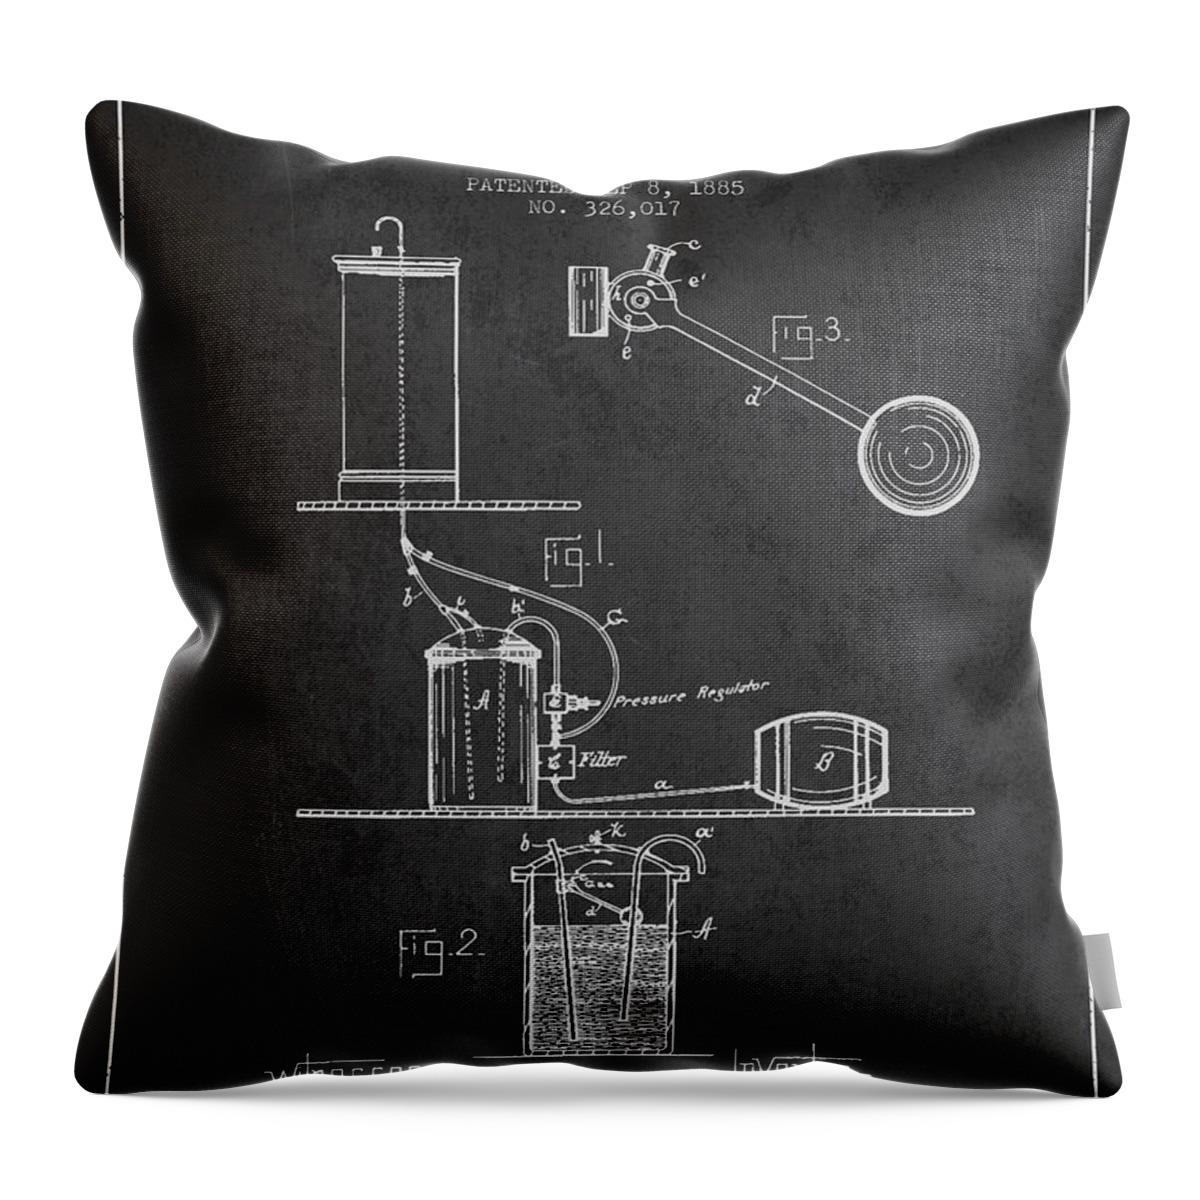 Beer Keg Throw Pillow featuring the digital art Beer Drawing Apparatus Patent from 1885 - Dark by Aged Pixel